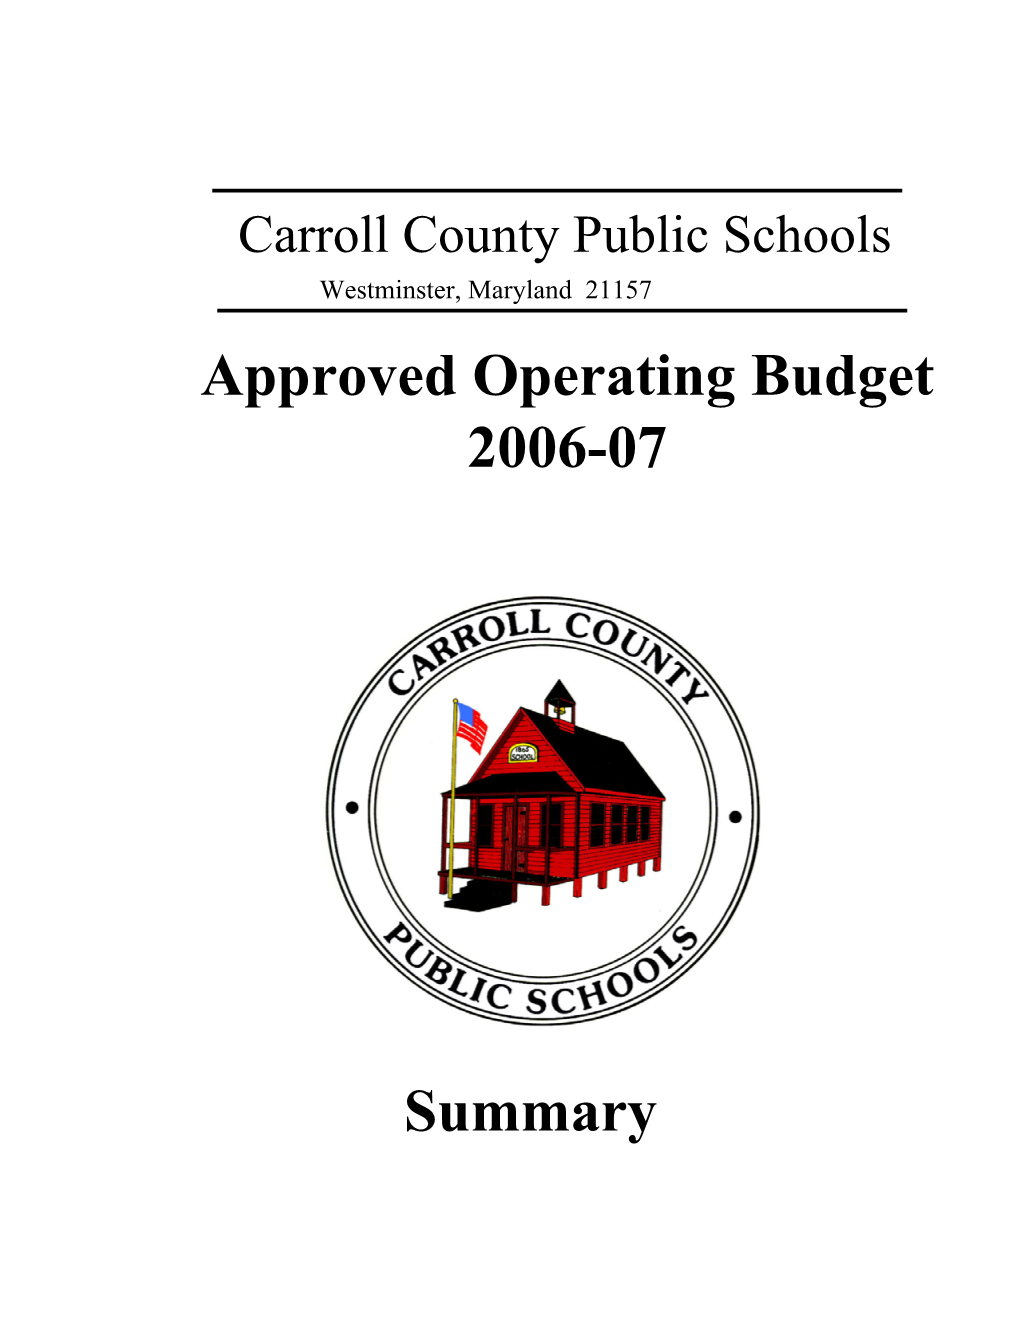 FY 2007 Costs Previously Funded with Grants 16